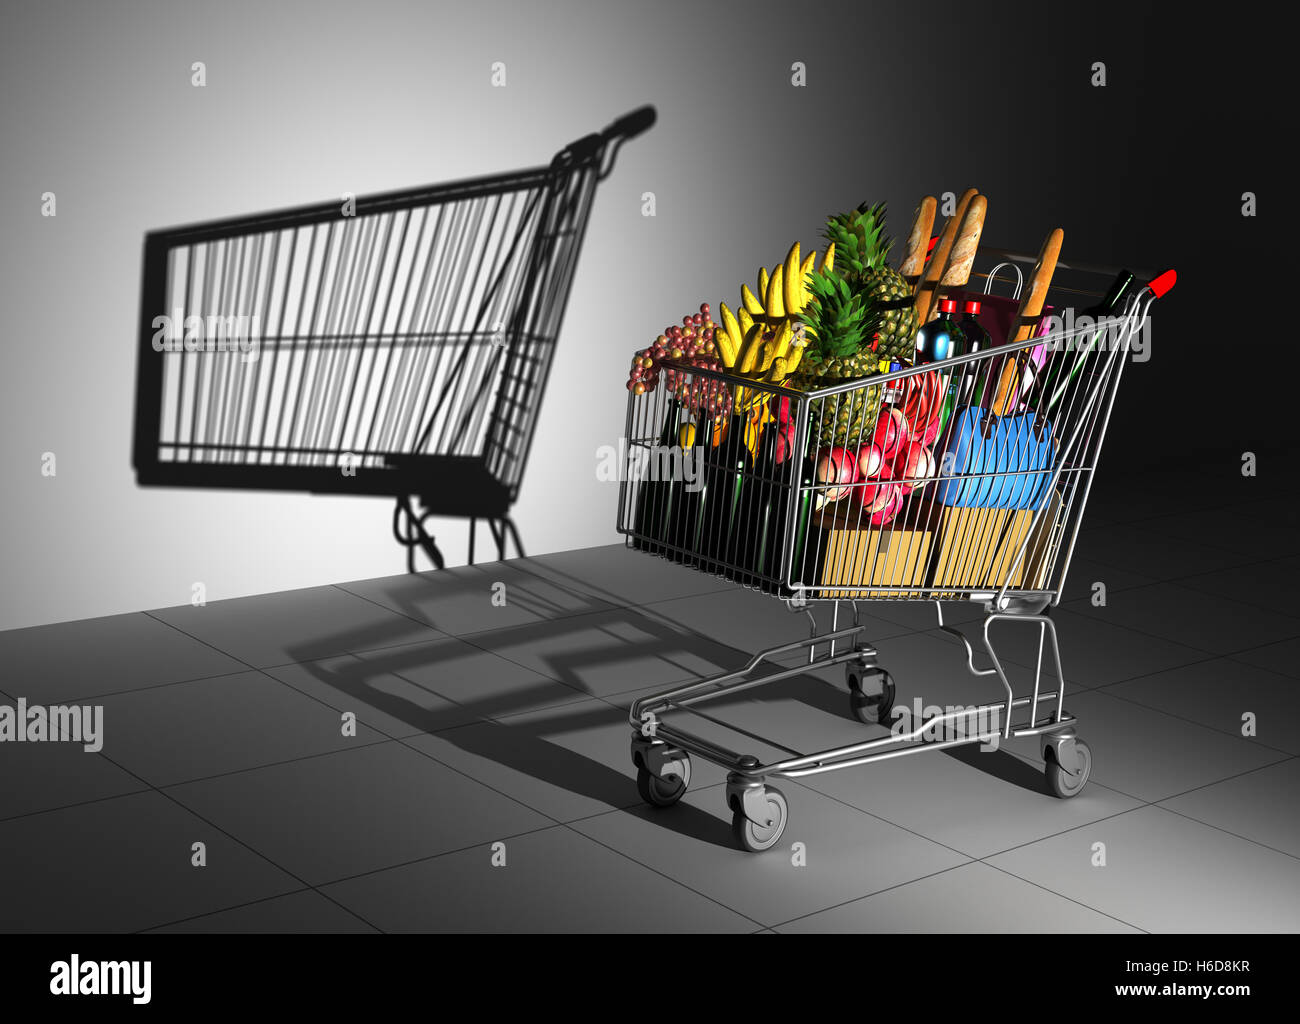 Shopping Cart Full Of Food Cast Shadow On The Wall As Empty Shopping Cart. 3D Illustration. Stock Photo